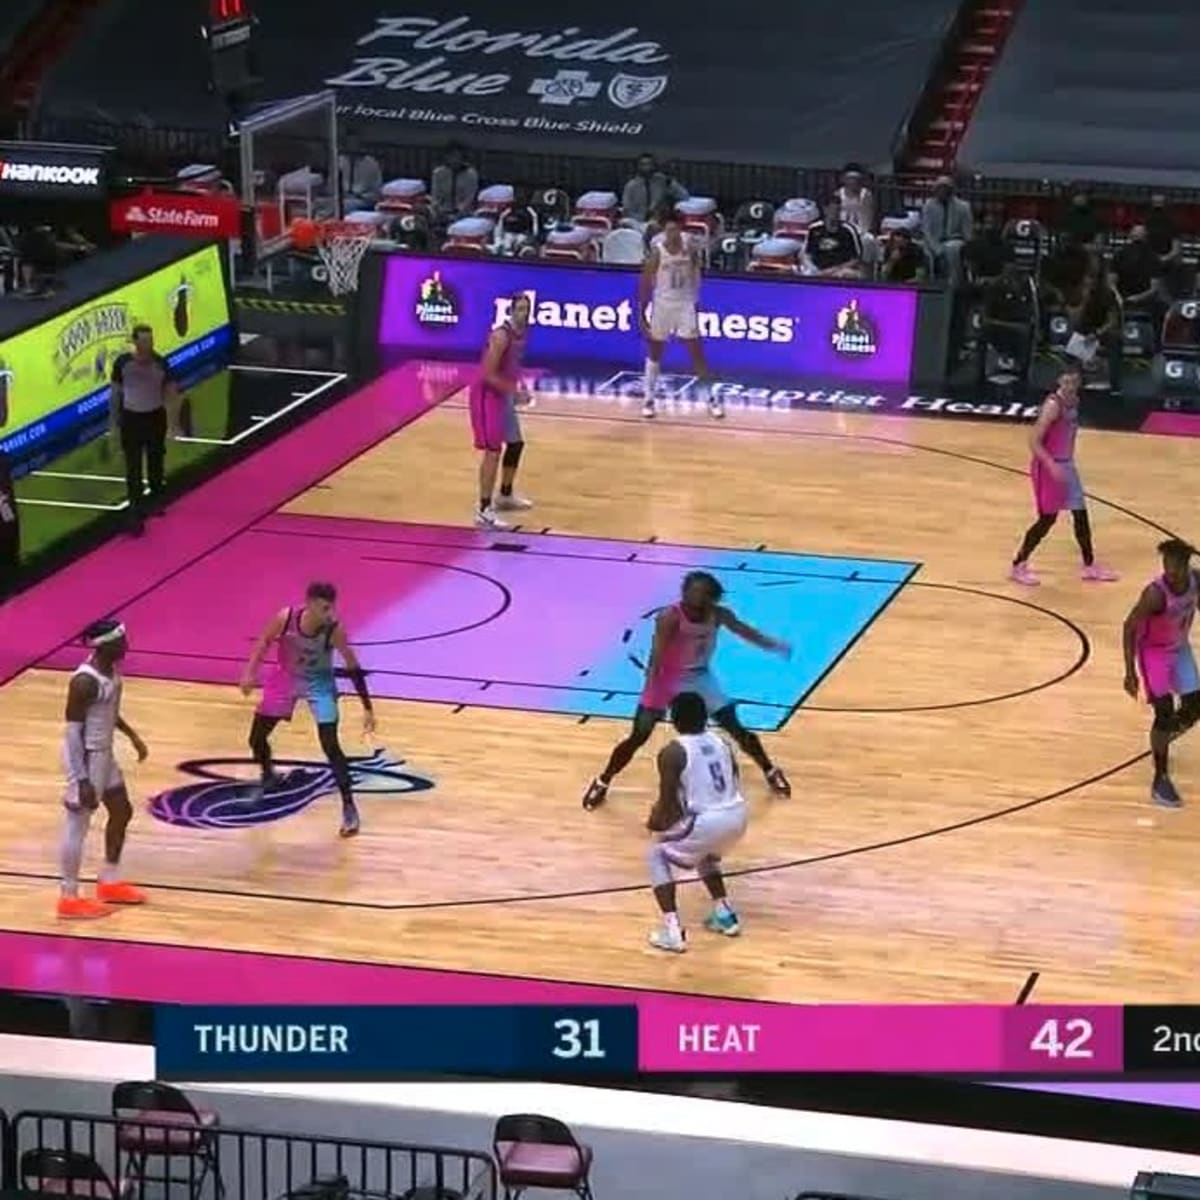 NBA fans had lots of jokes about the Miami Heat's colorful court